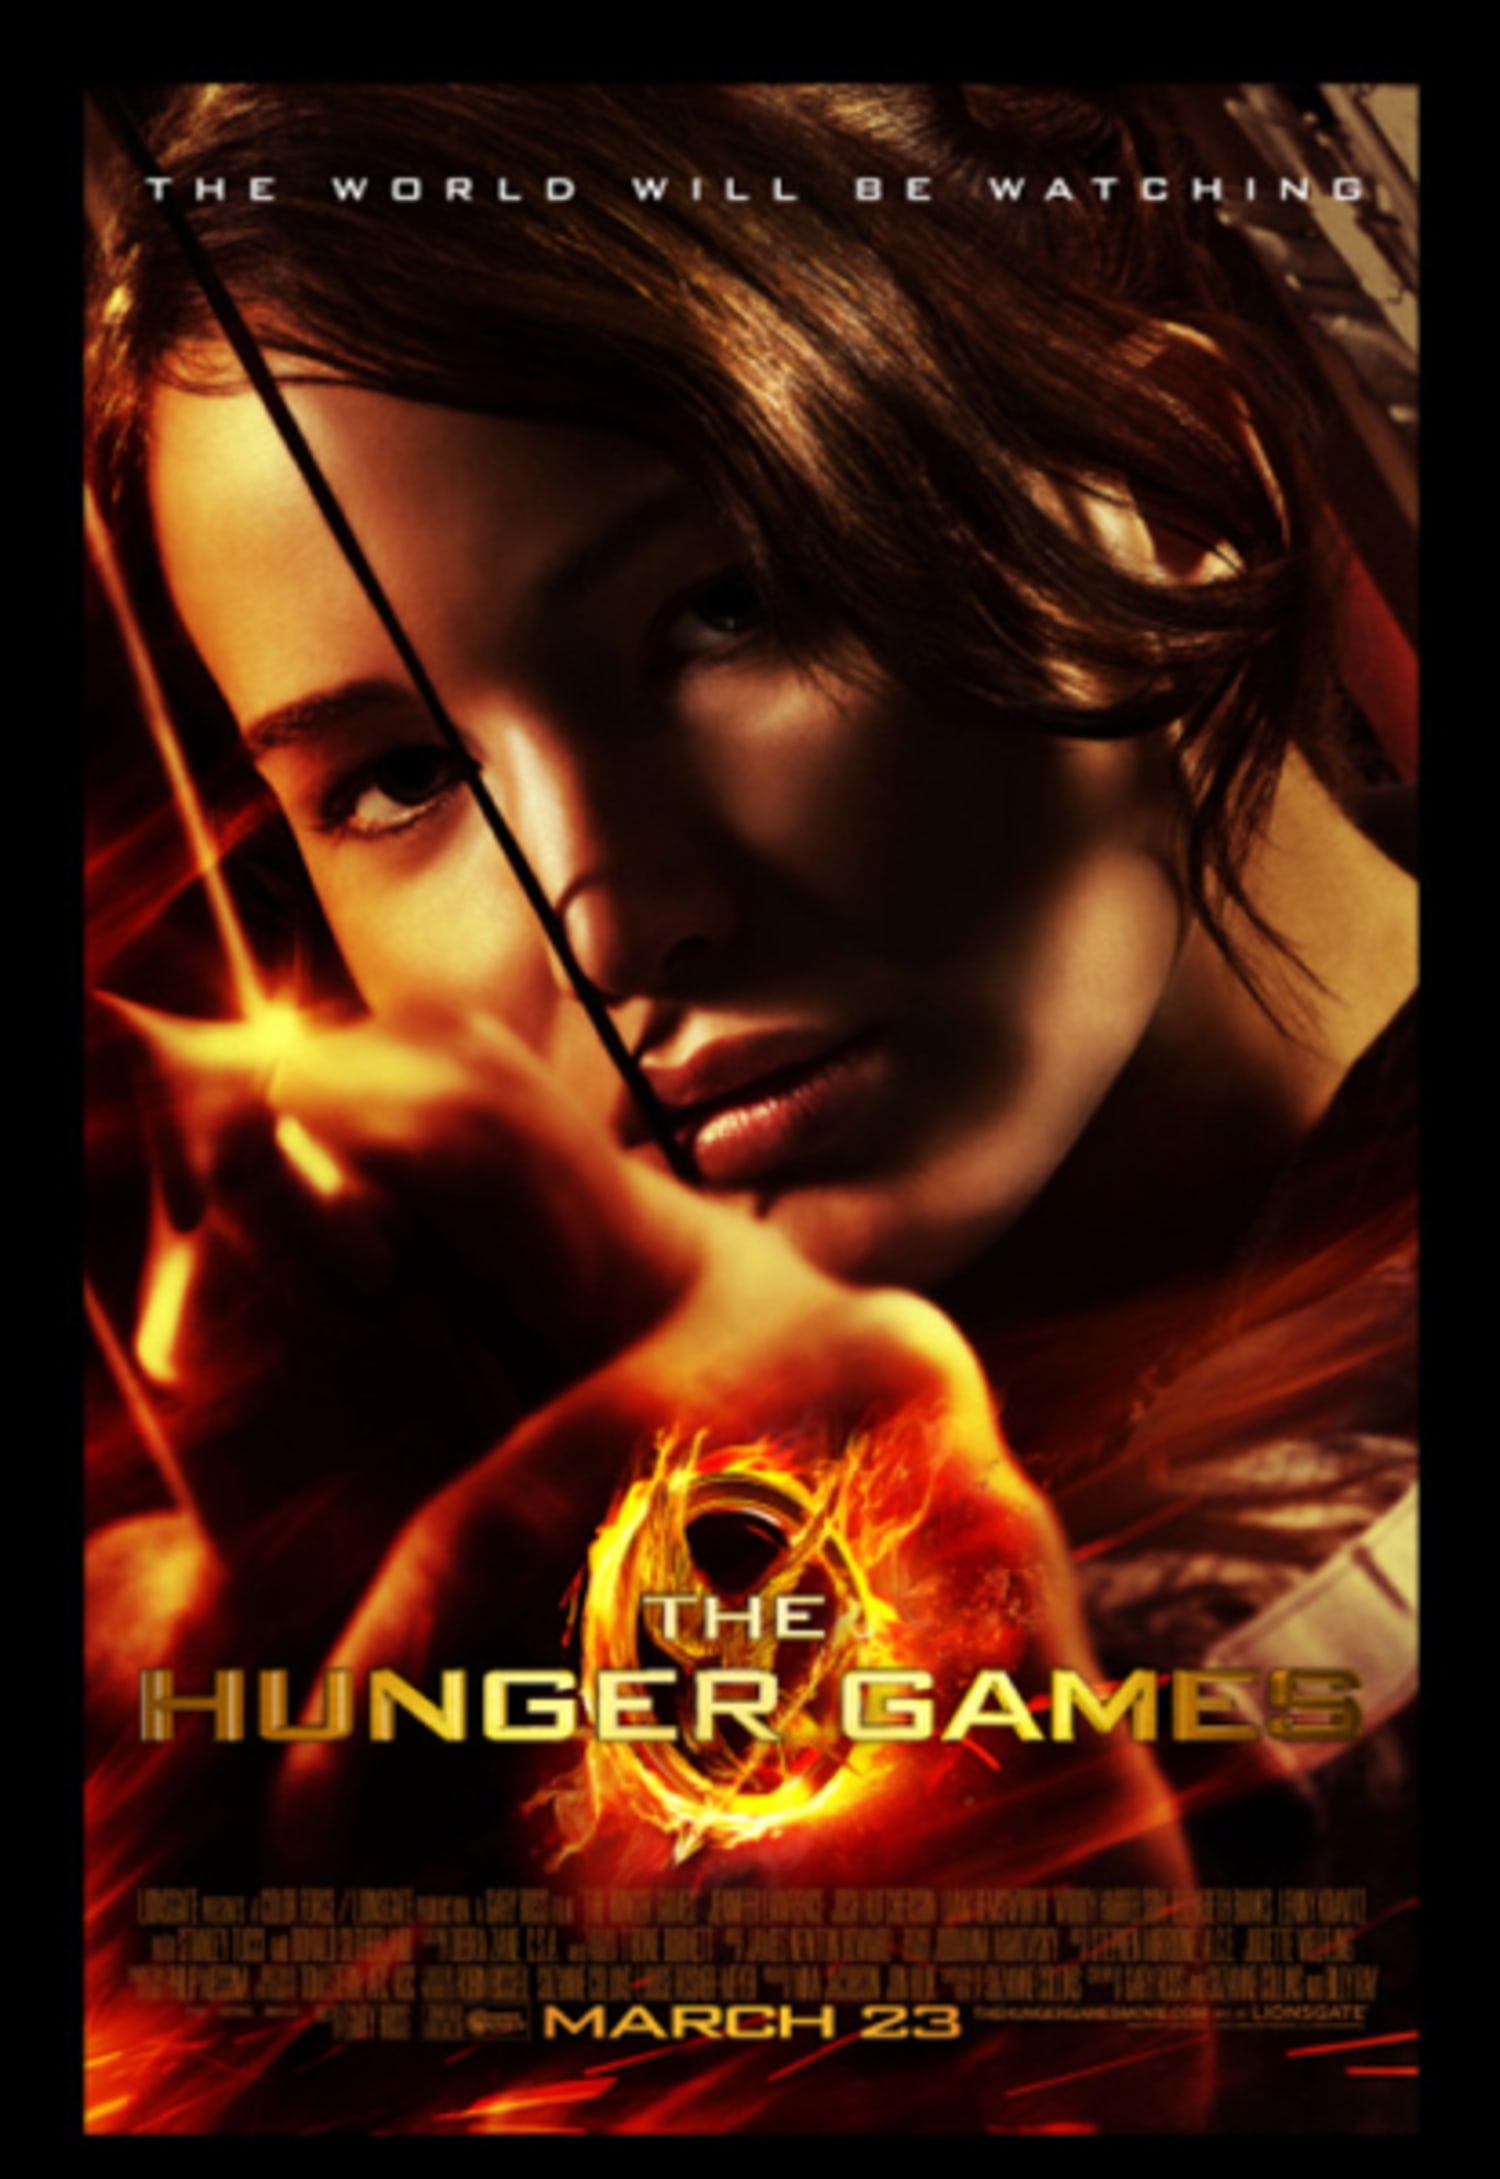 The Hunger Games Movie Trading Card 1x #019 Katniss Everdeen